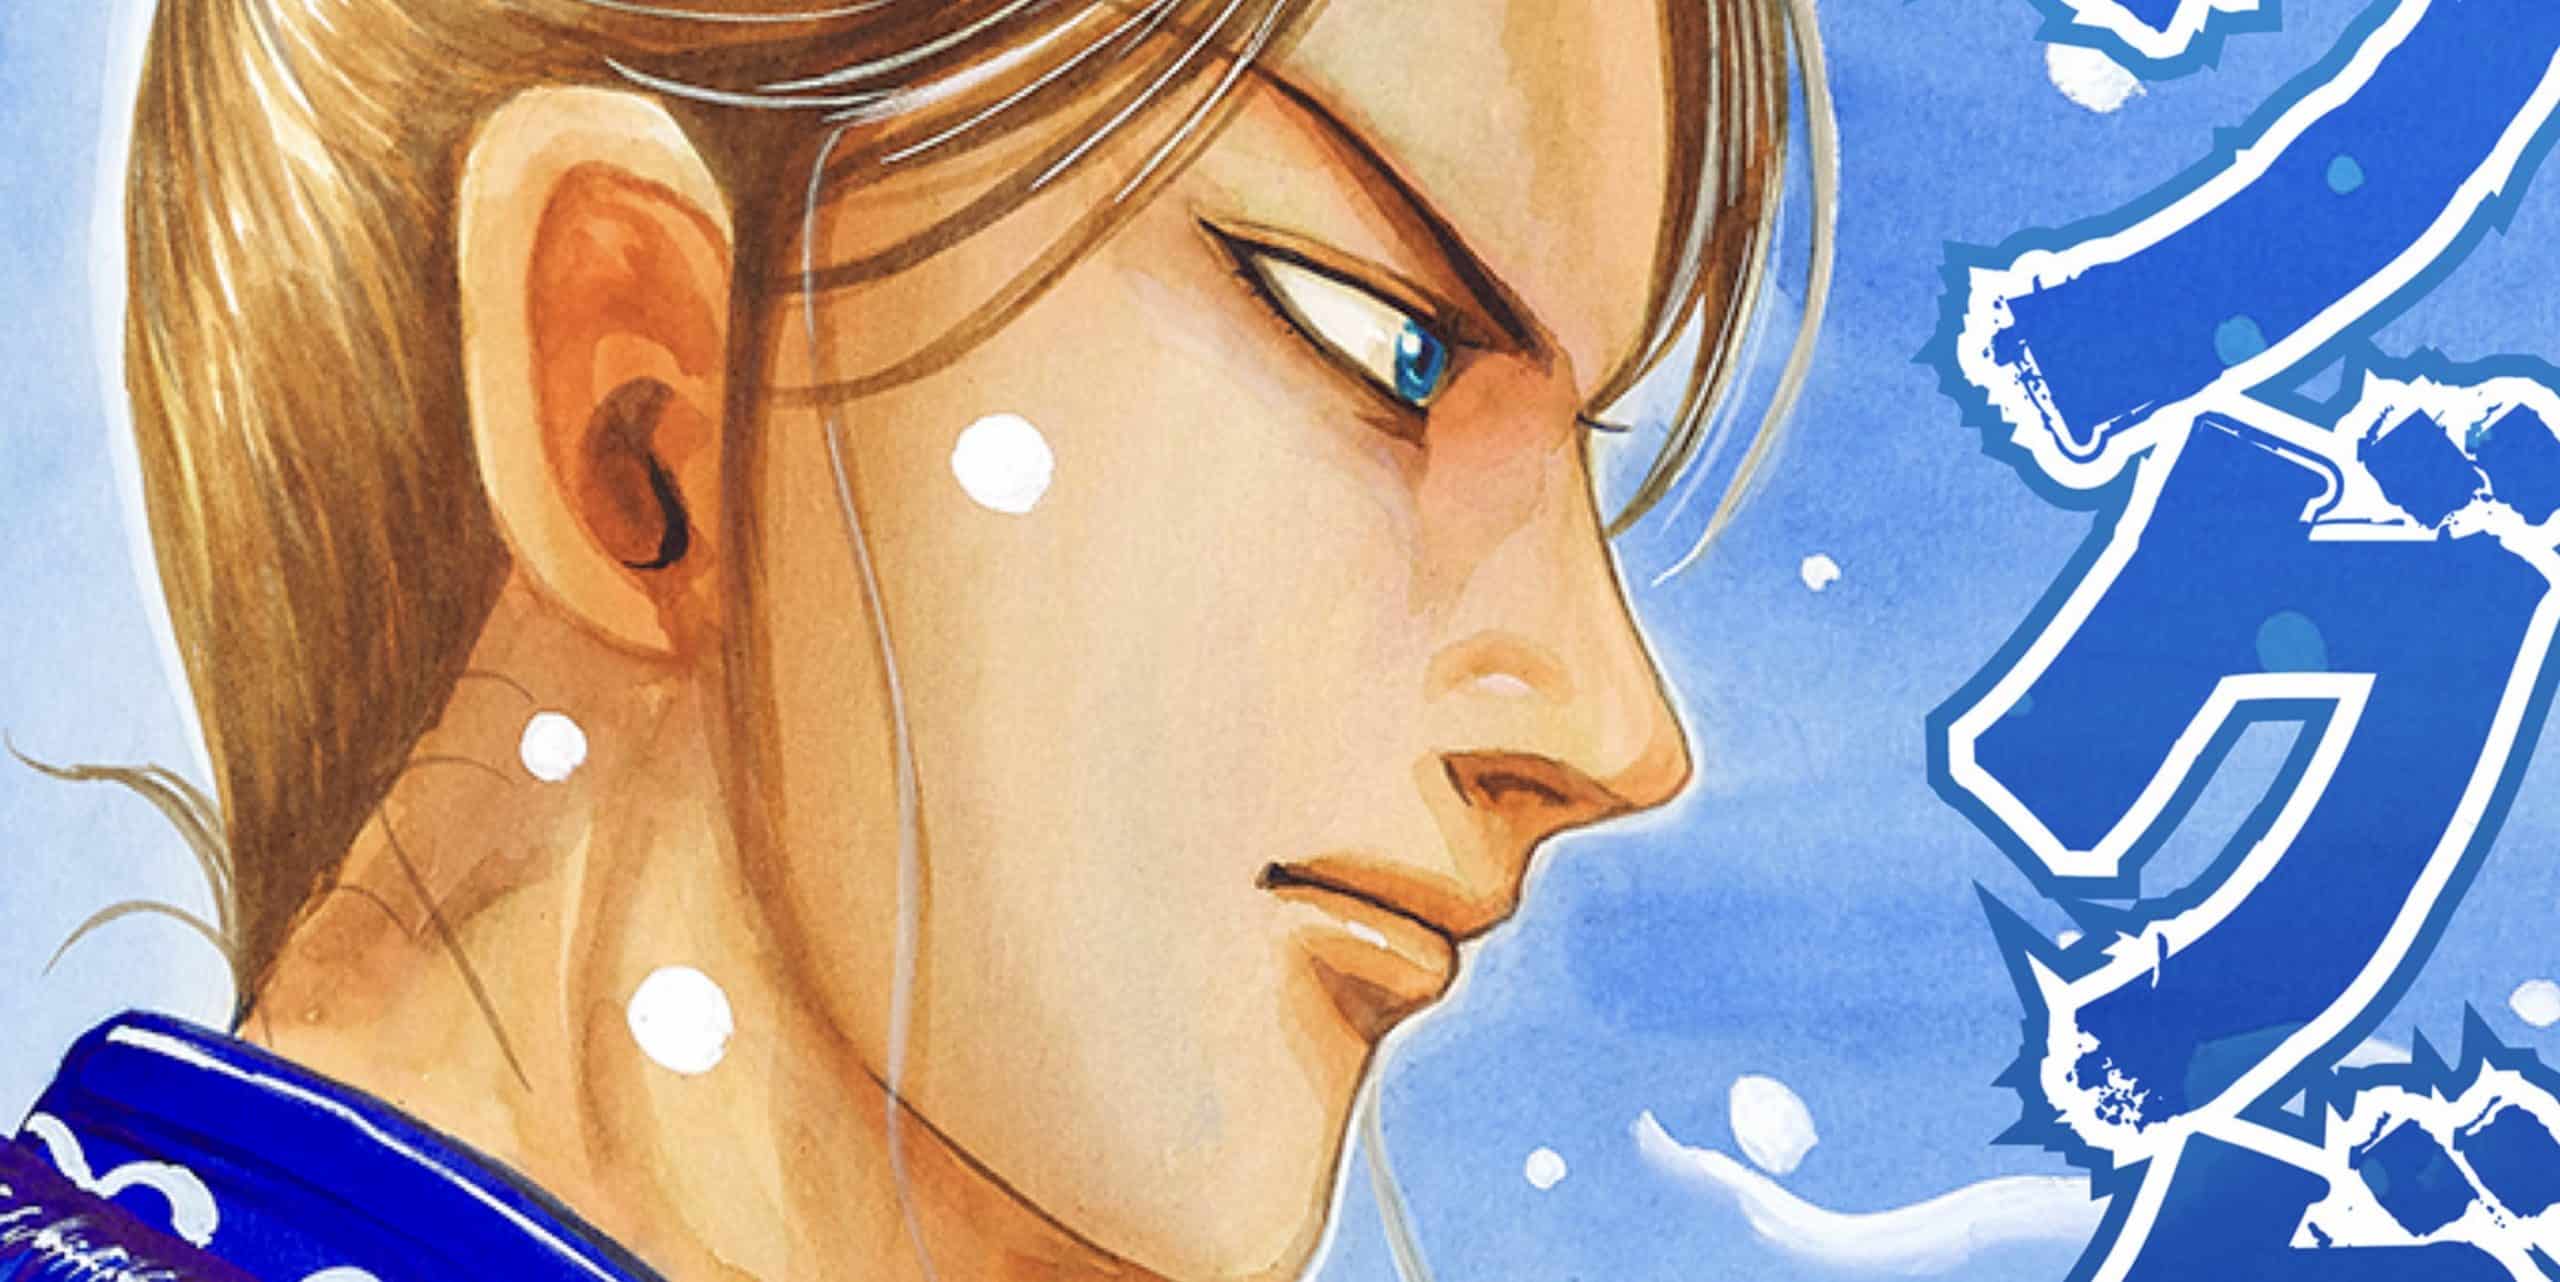 Kingdom Chapter 754 spoilers and raw scans